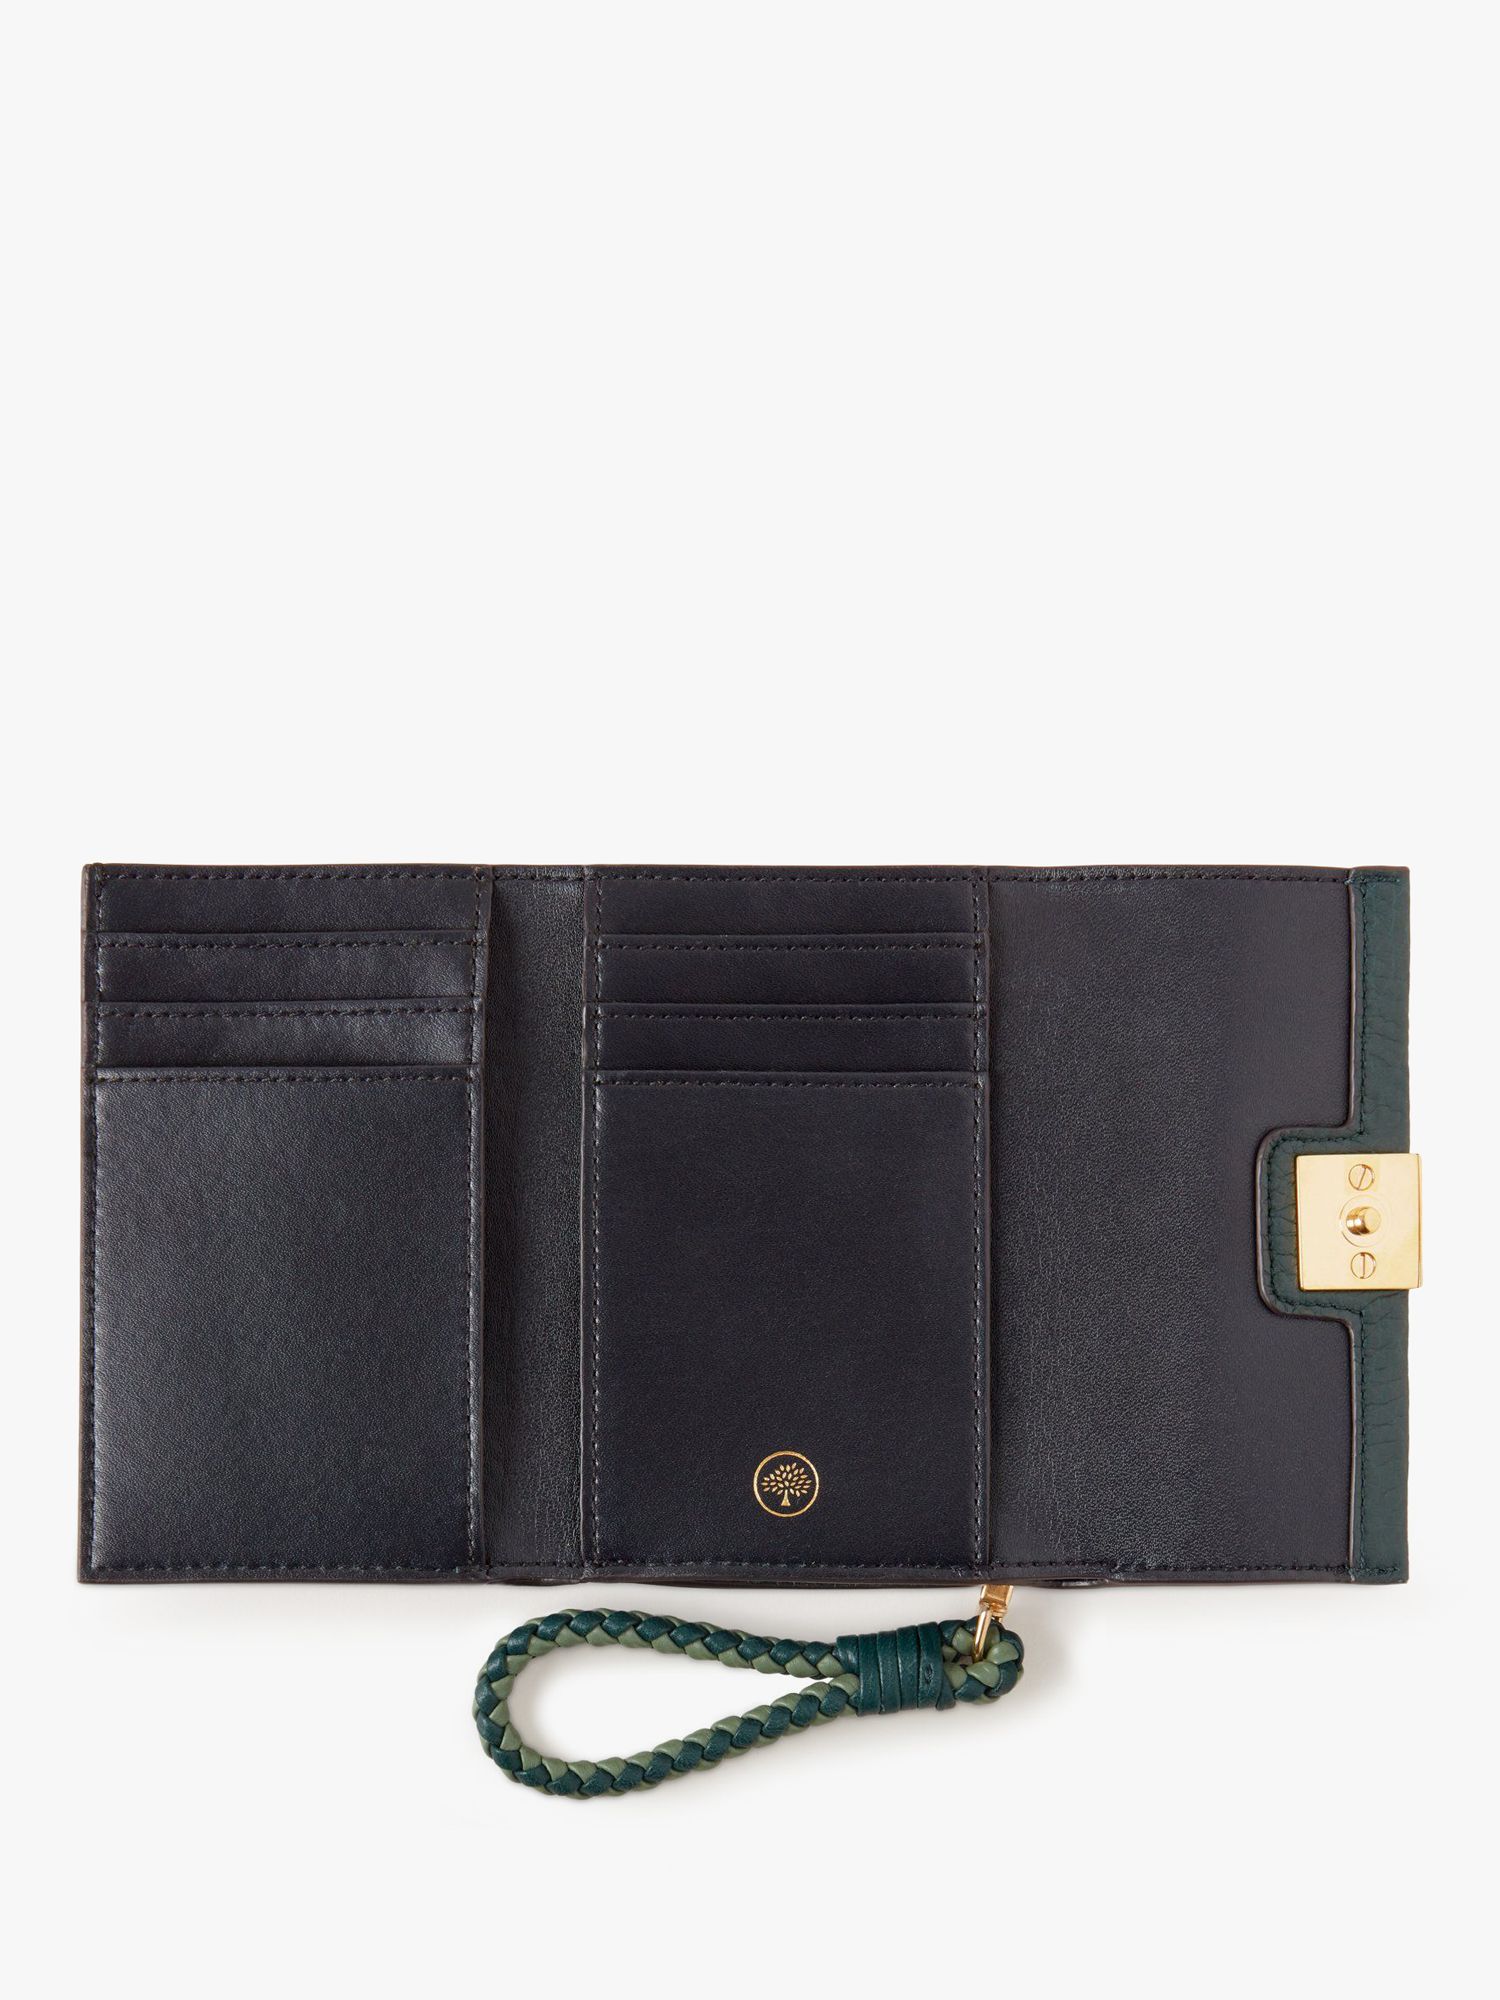 Mulberry Iris Heavy Grain Leather Trifold Wallet, Mulberry Green at John Lewis & Partners